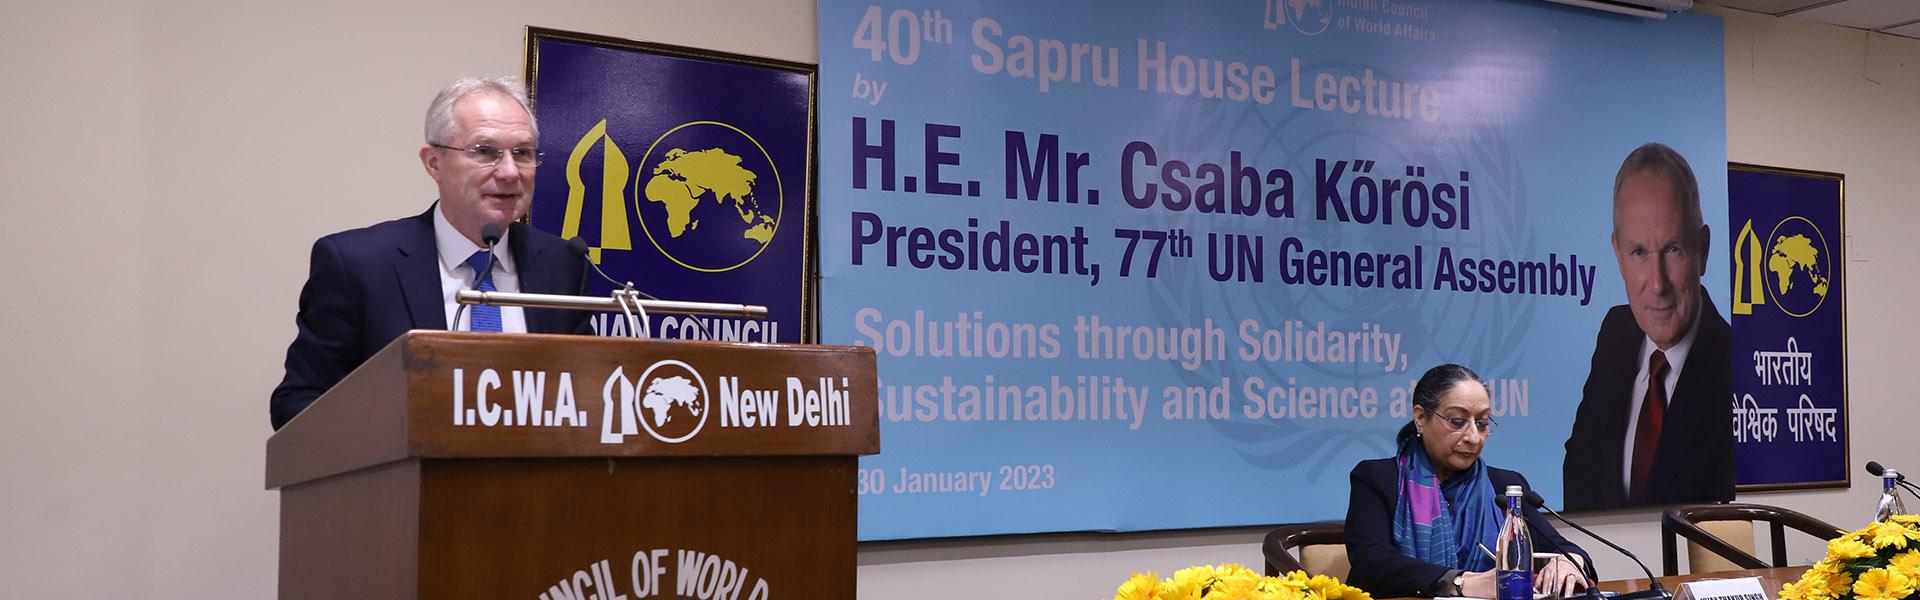 H.E. Mr. Csaba Korosi, President, 77th UN General Assembly (UNGA) delivered 40th Sapru House Lecture on “Solutions through Solidarity, Sustainability and Science at the UN” at ICWA, 30 January 2023